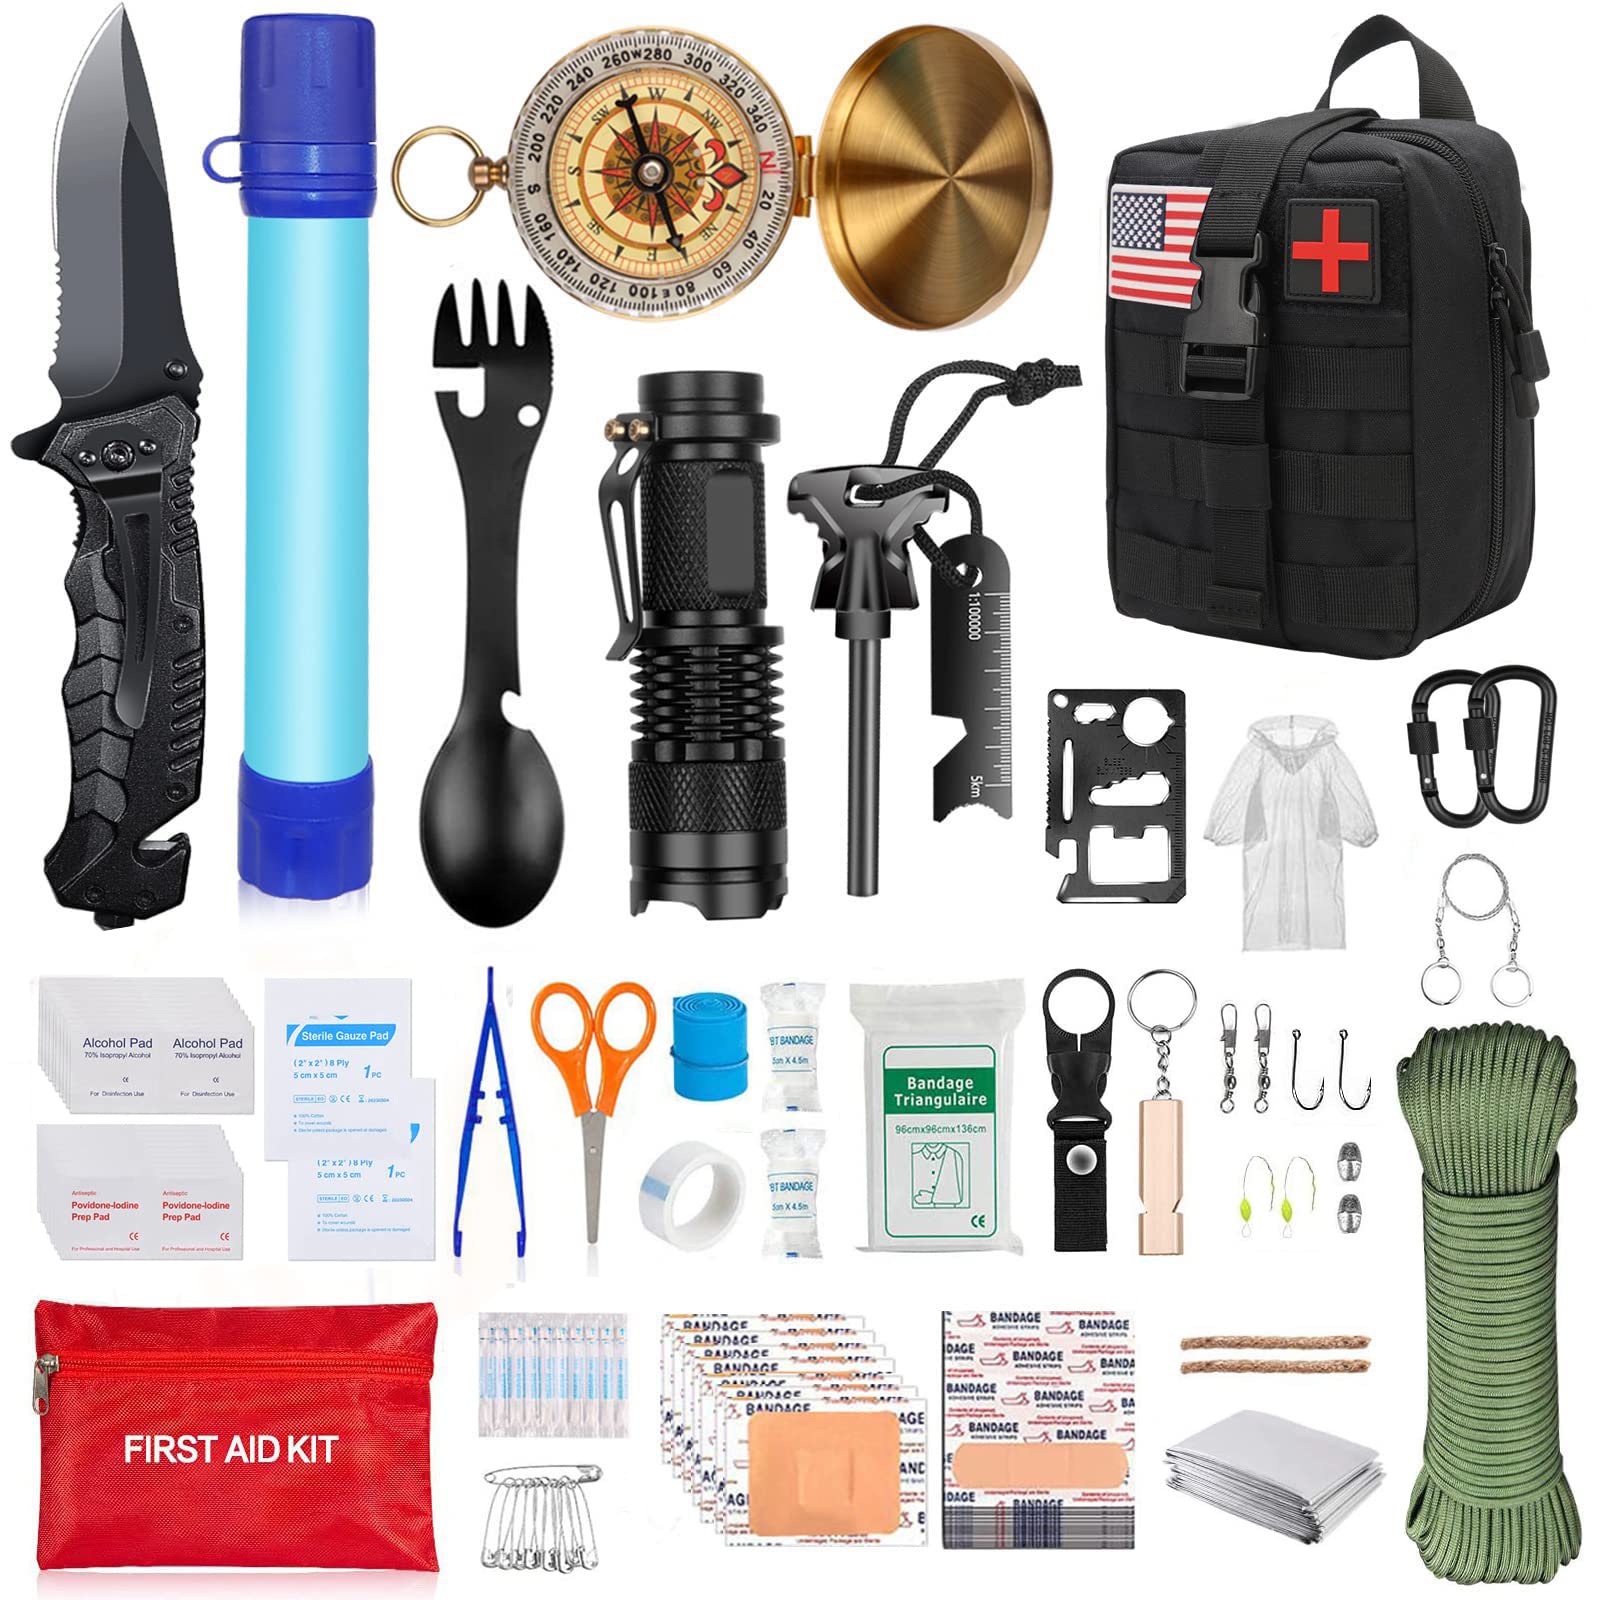 Survival Kit 35 in 1, First Aid Kit, Survival Gear, Survival Tool Gifts for  Men Boyfriend Him Husband Camping, Hiking, Hunting, Fishing